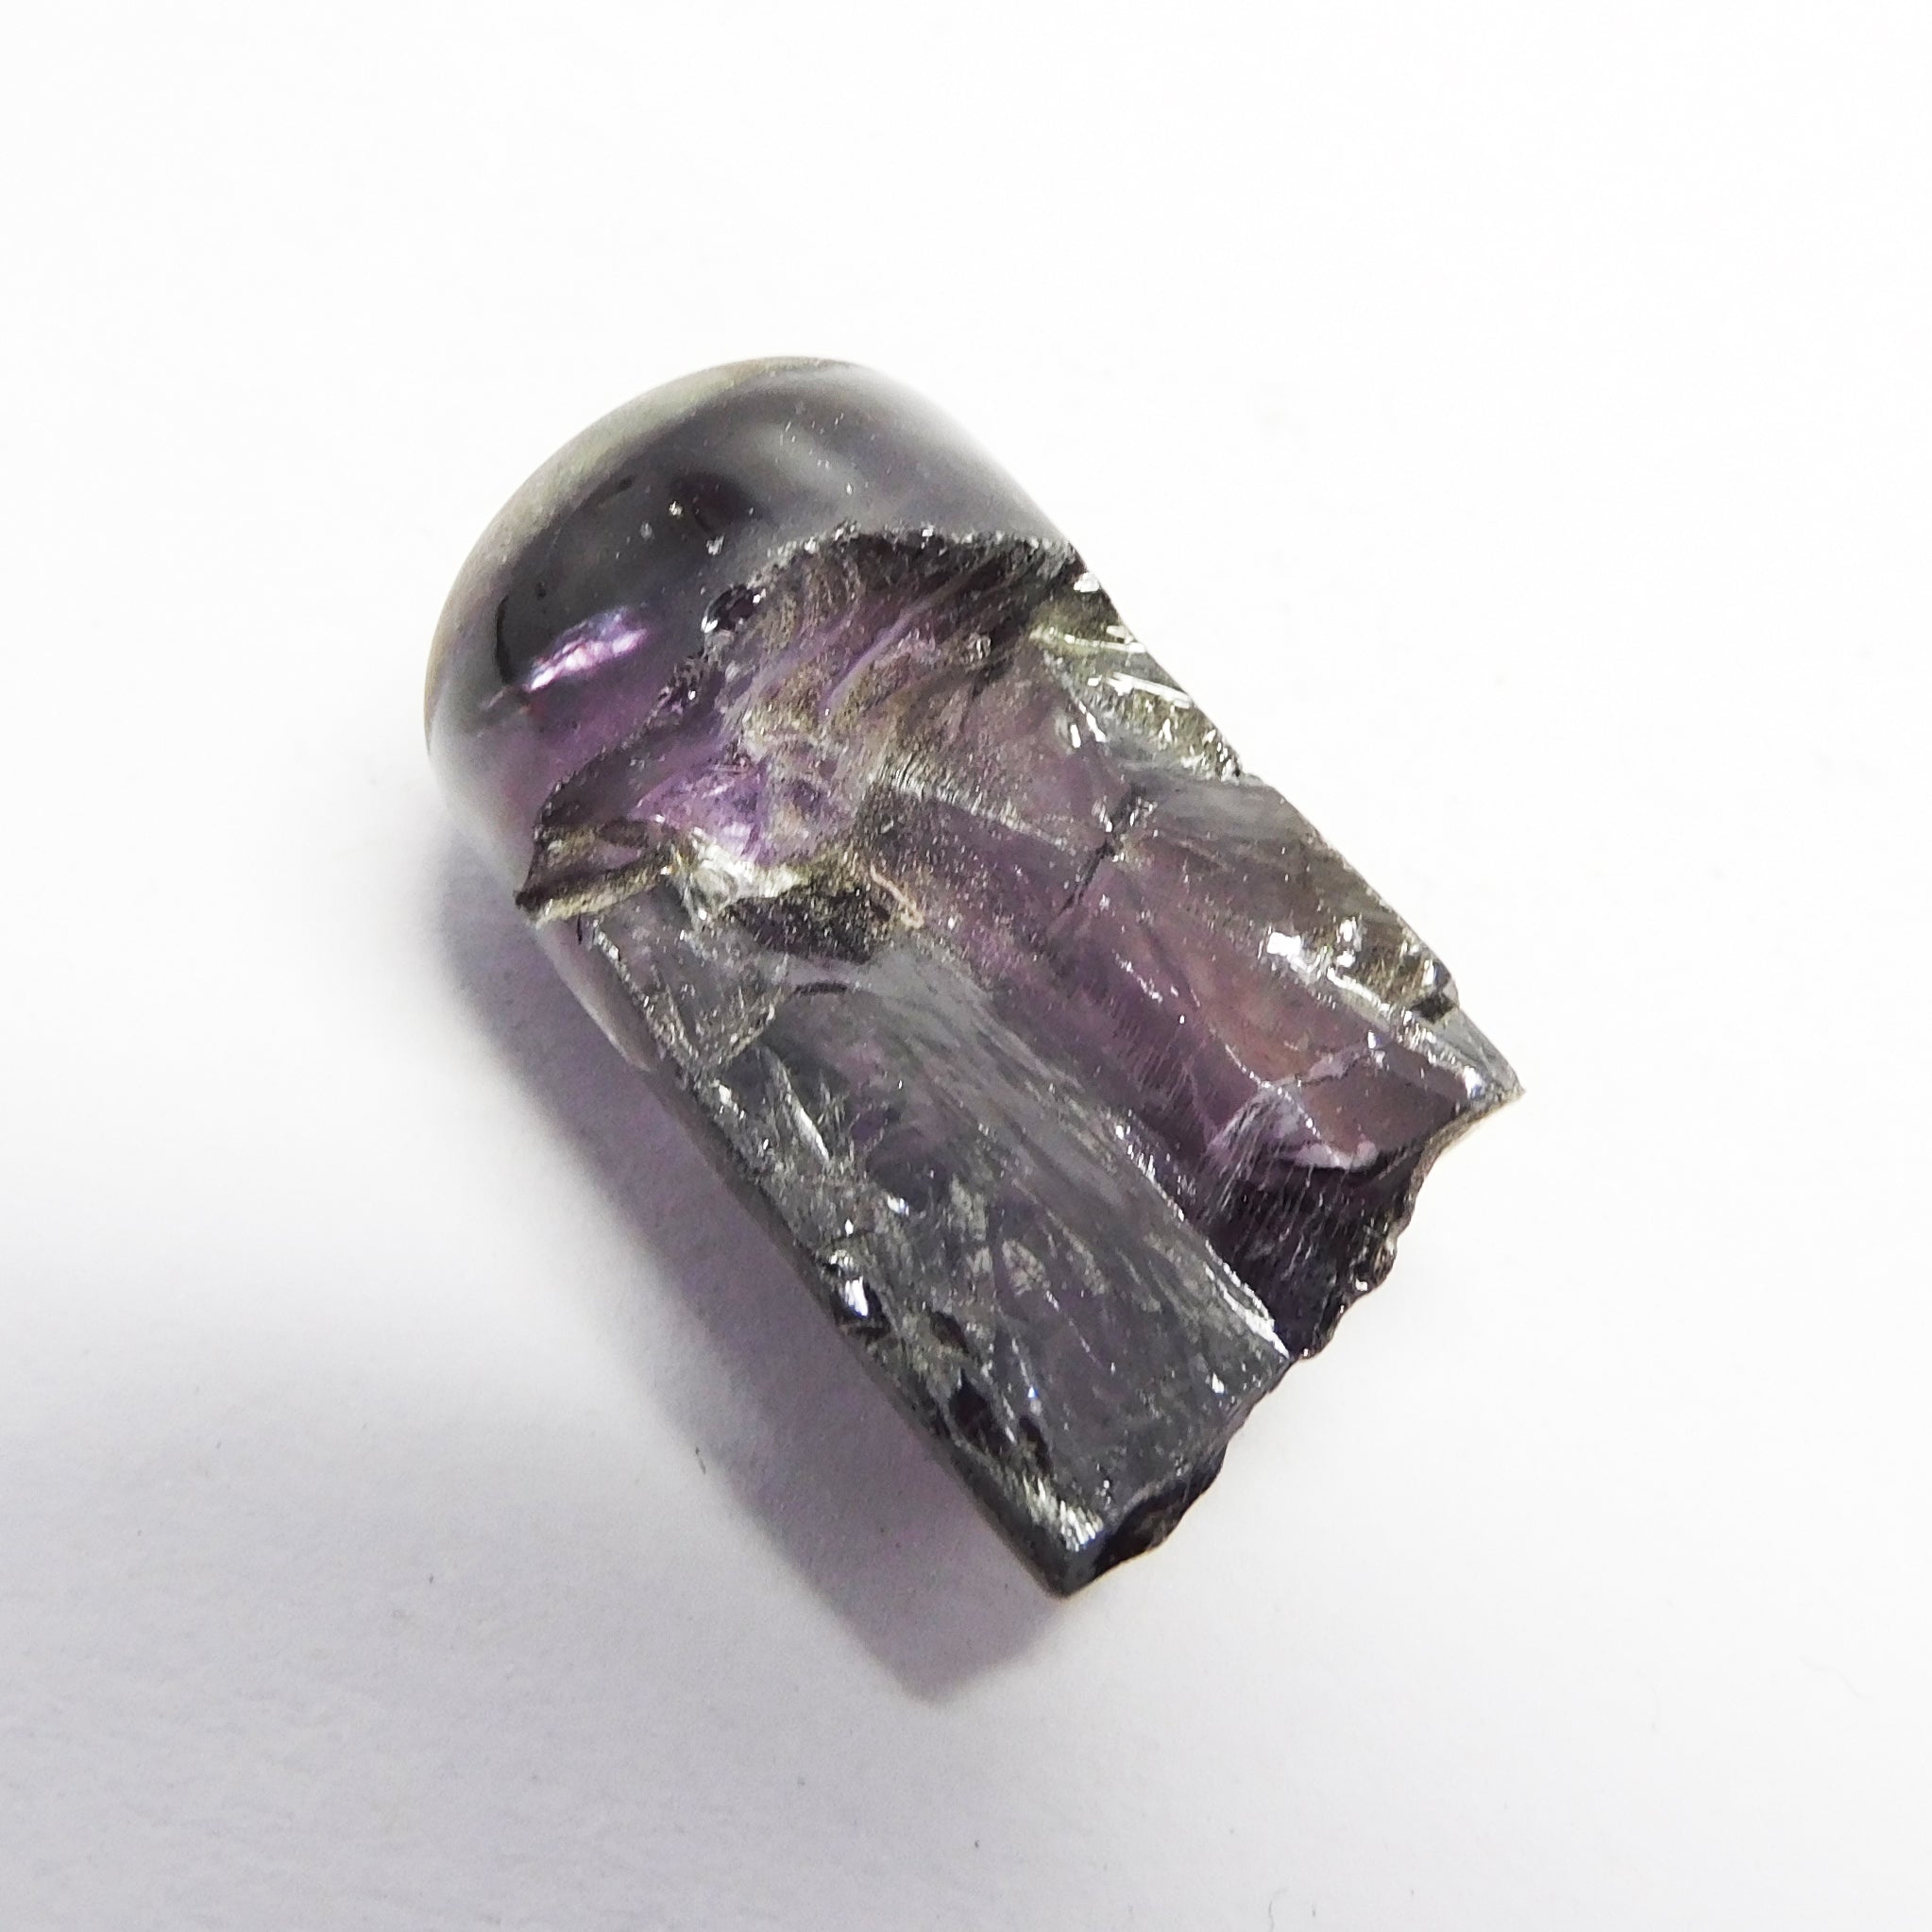 Best On Sale !! Free Shipping Free Gift !! Gift For Her/ Him , CERTIFIED Color Change Natural Uncut Alexandrite 33.95 Carat Loose Gemstone Raw Rough